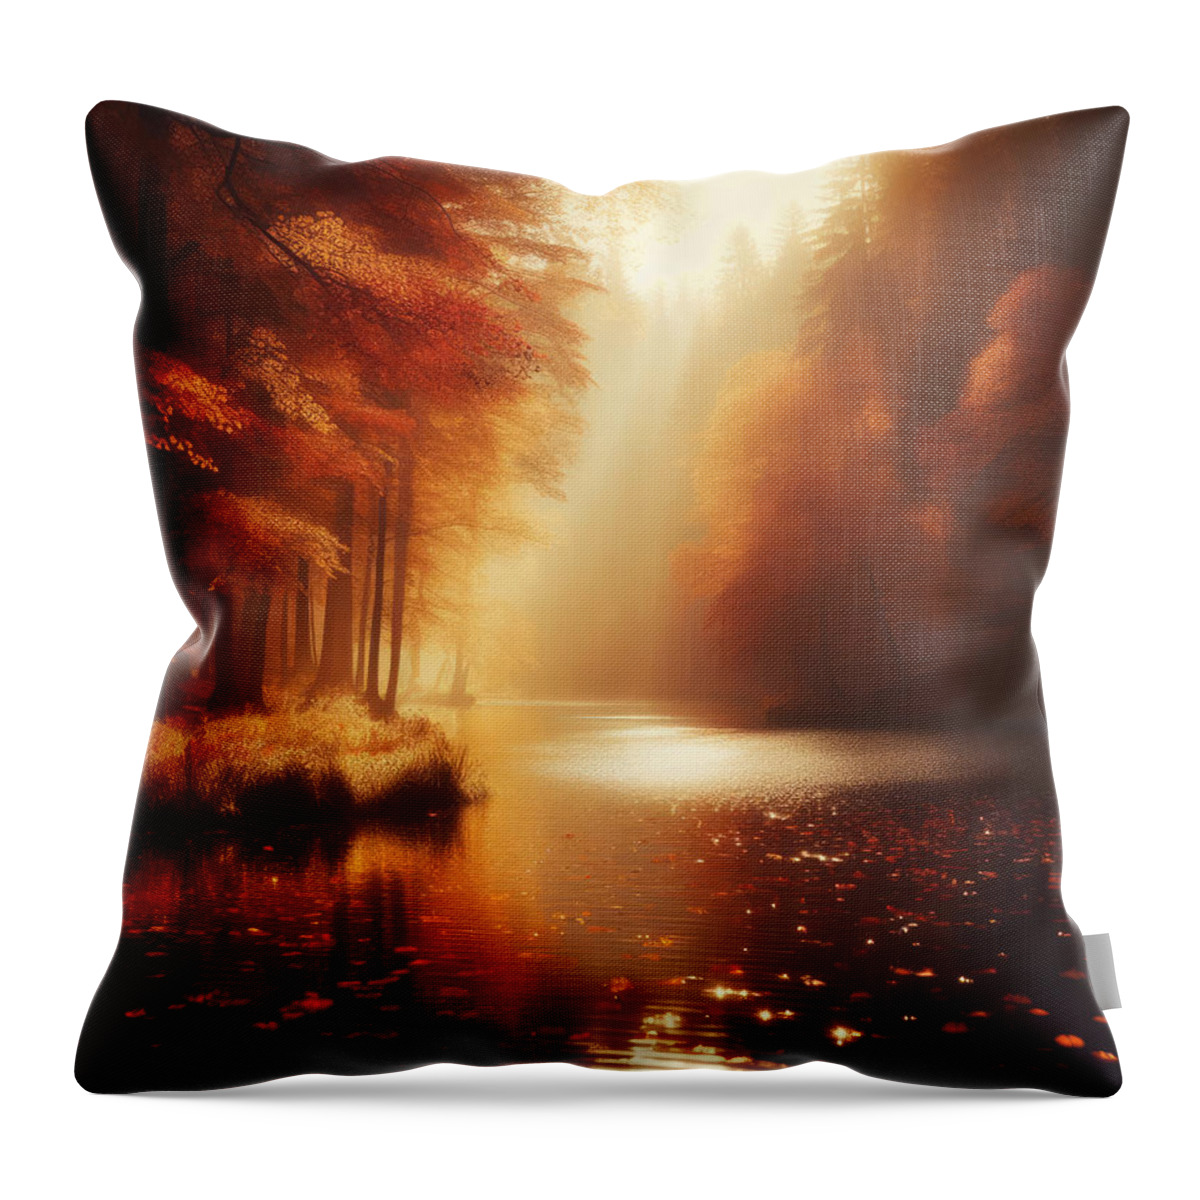 Autumn Throw Pillow featuring the photograph And Then There Was Fall by Bill and Linda Tiepelman